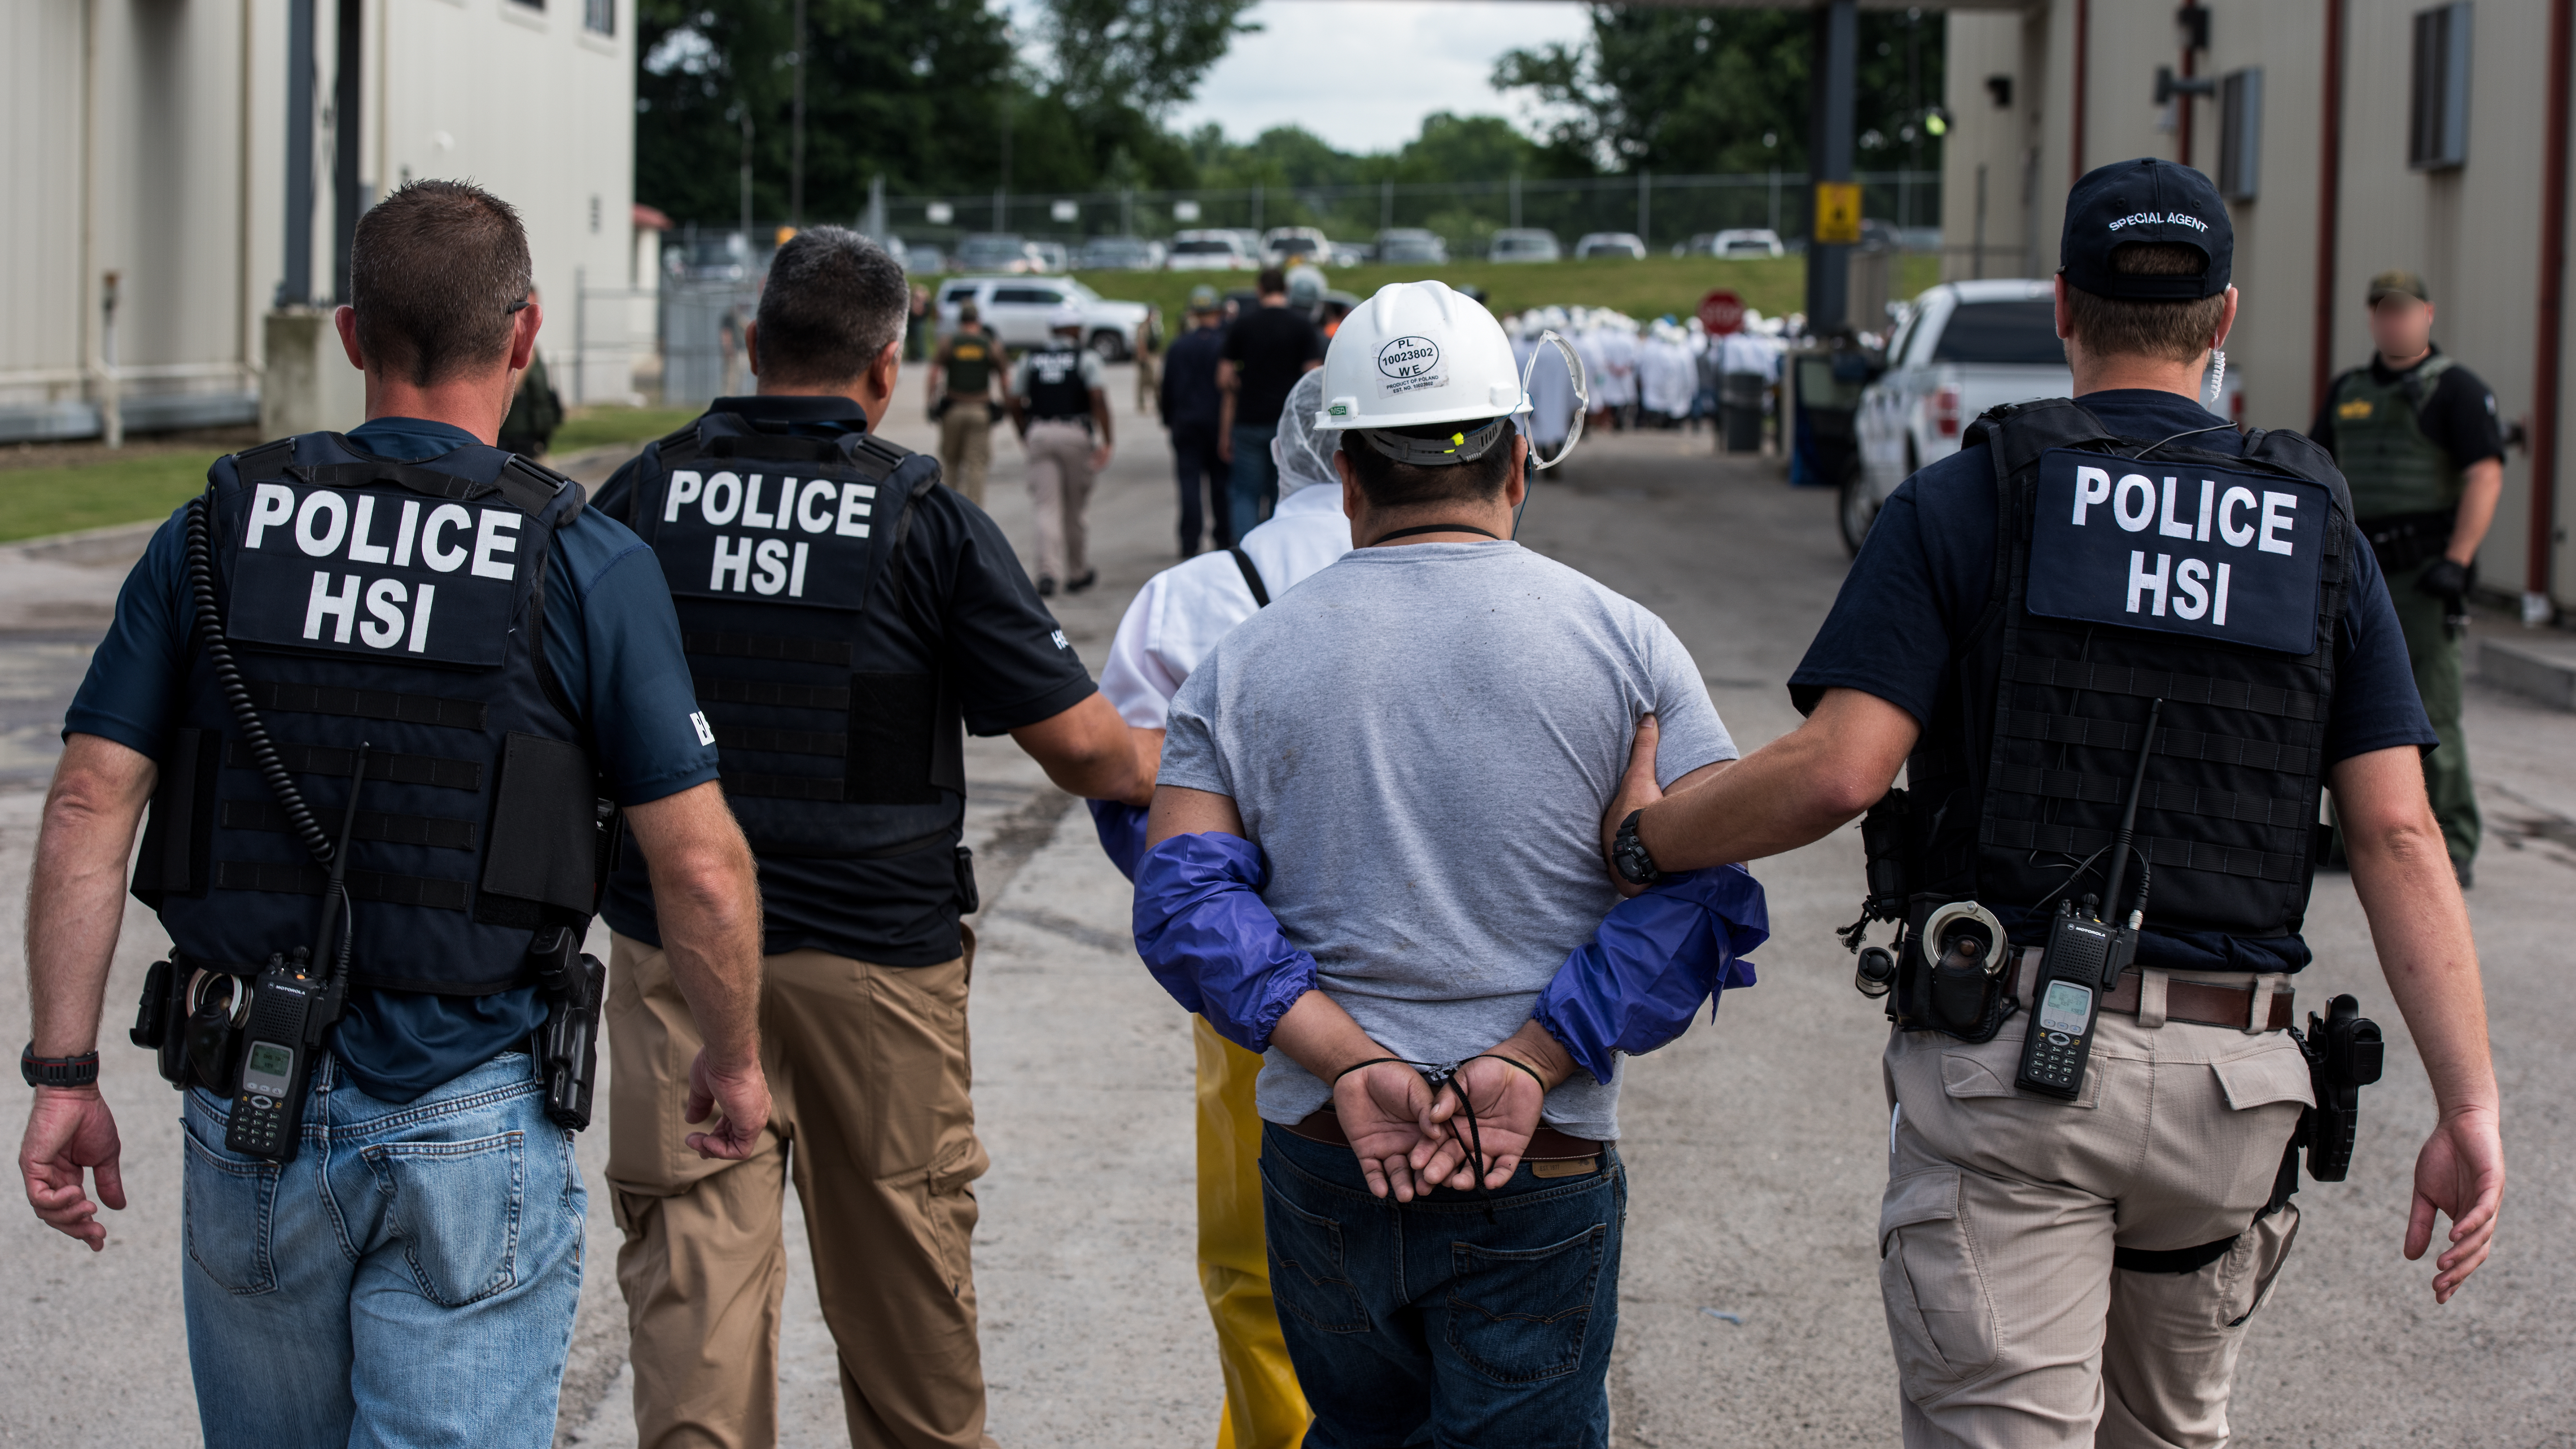 Special agents with Homeland Security Investigations, the investigative arm of U.S. Immigration and Customs Enforcement, lead a man away from Fresh Mark in Salem, Ohio, on Tuesday. The mass arrests were the result of the second such large-scale raid this month.
